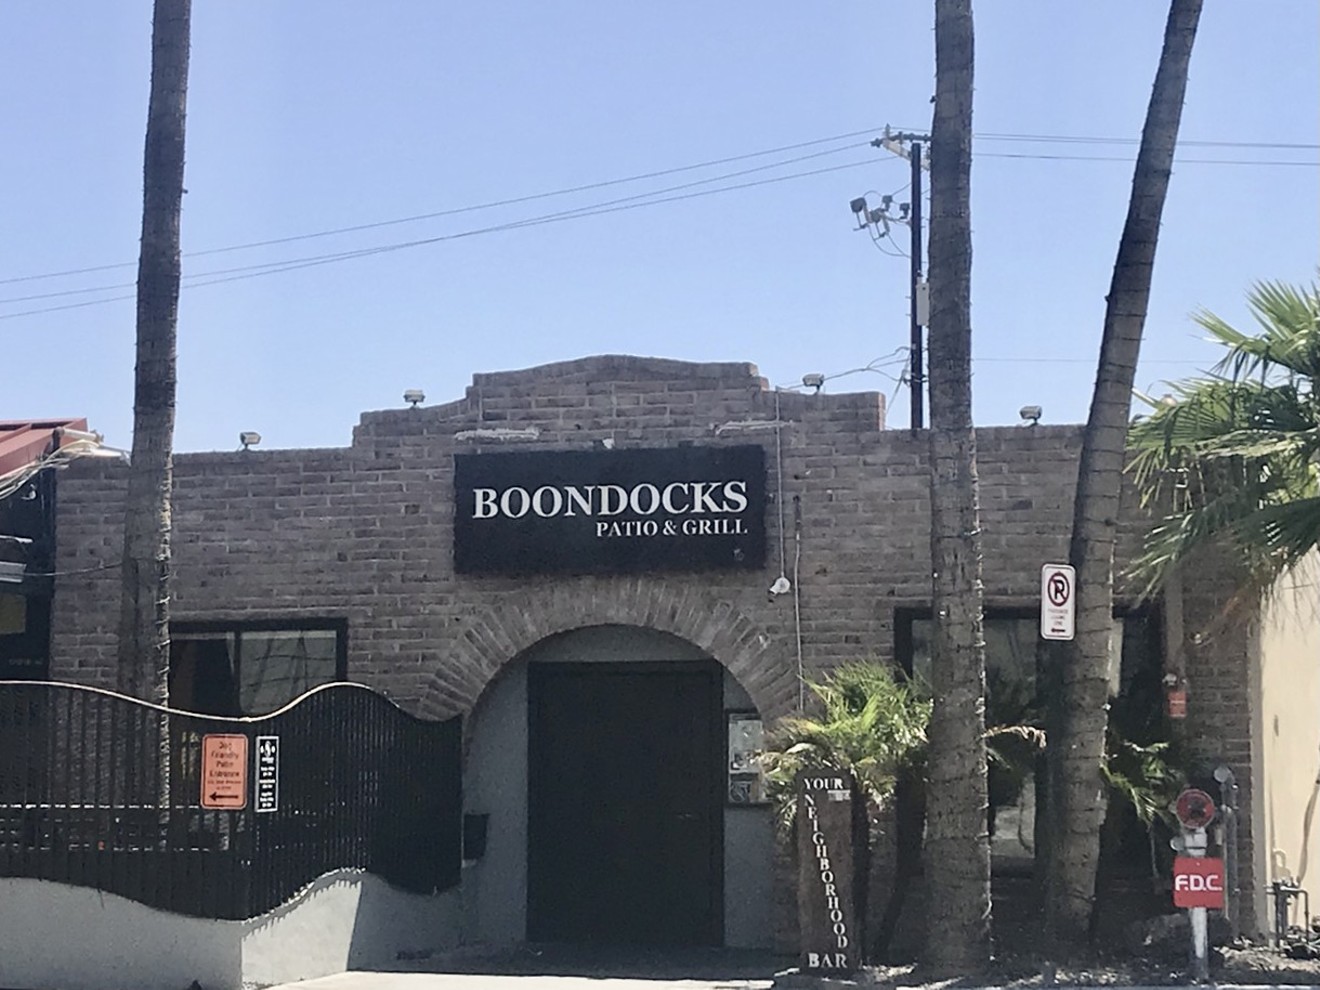 Entrance to Boondocks Patio & Grill in Old Town Scottsdale.